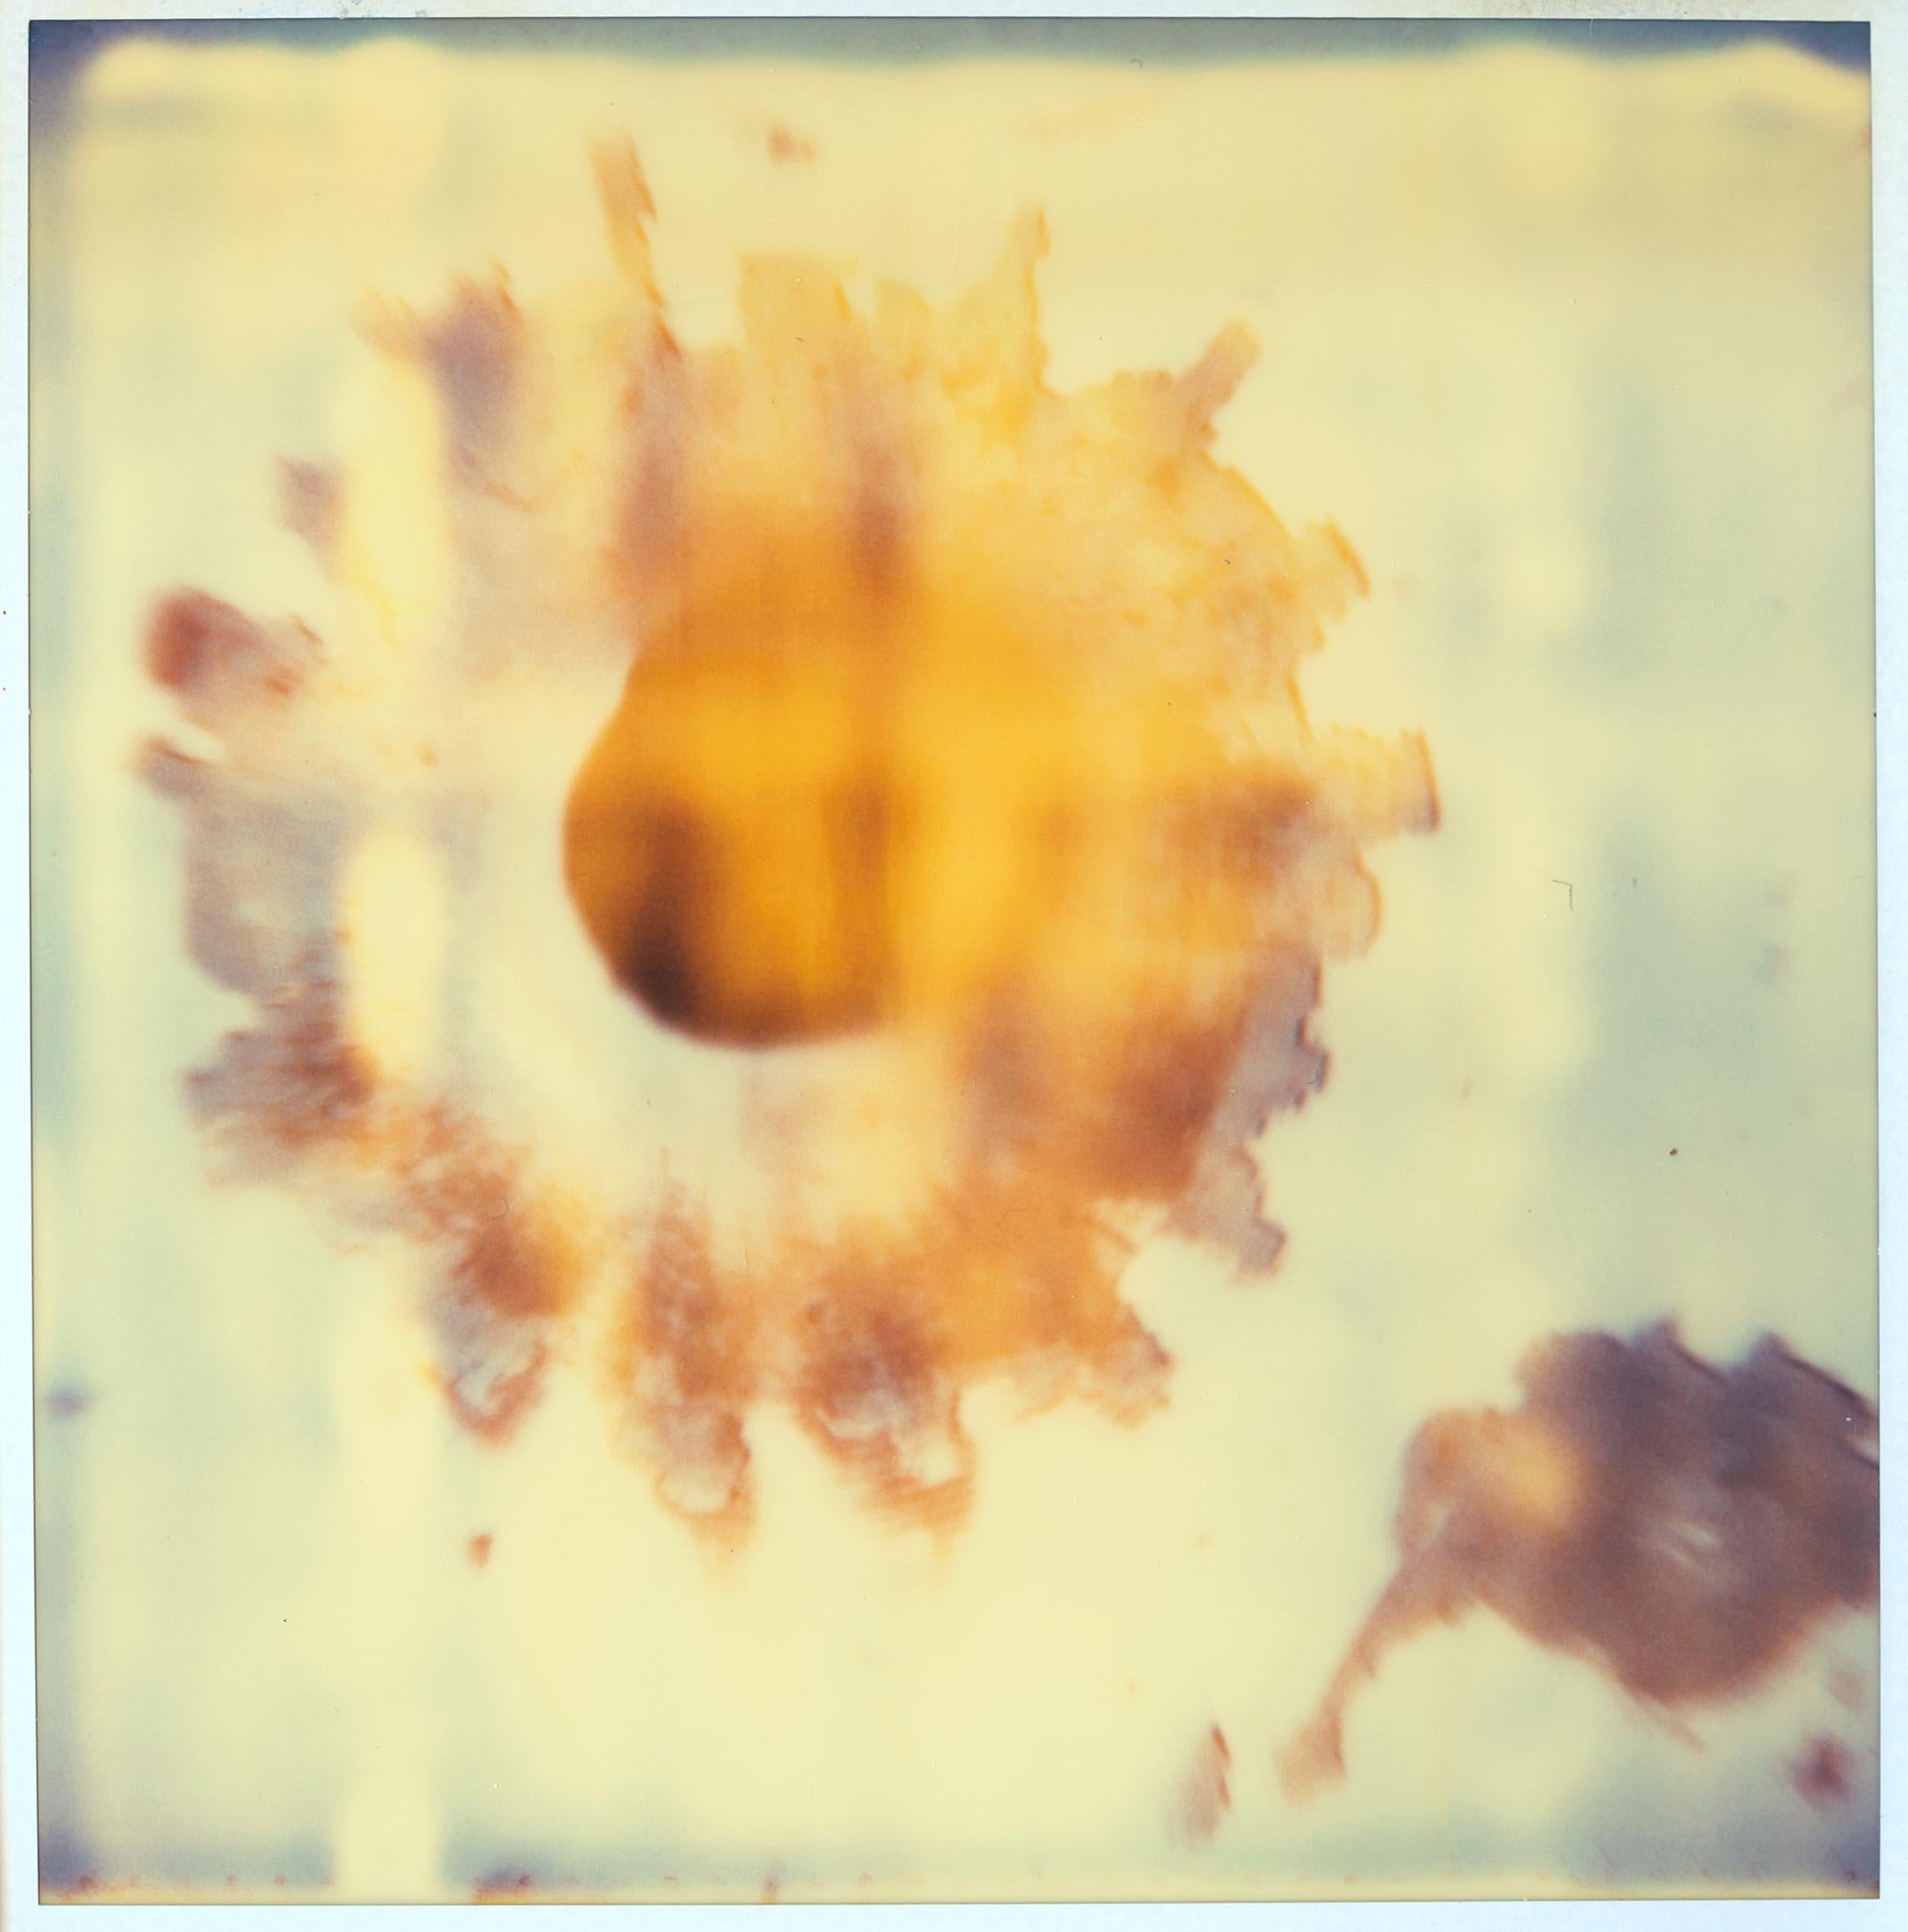 Stefanie Schneider Abstract Photograph - Impact (Wastelands) - Polaroid, Contemporary, Abstract, Analog, Mounted